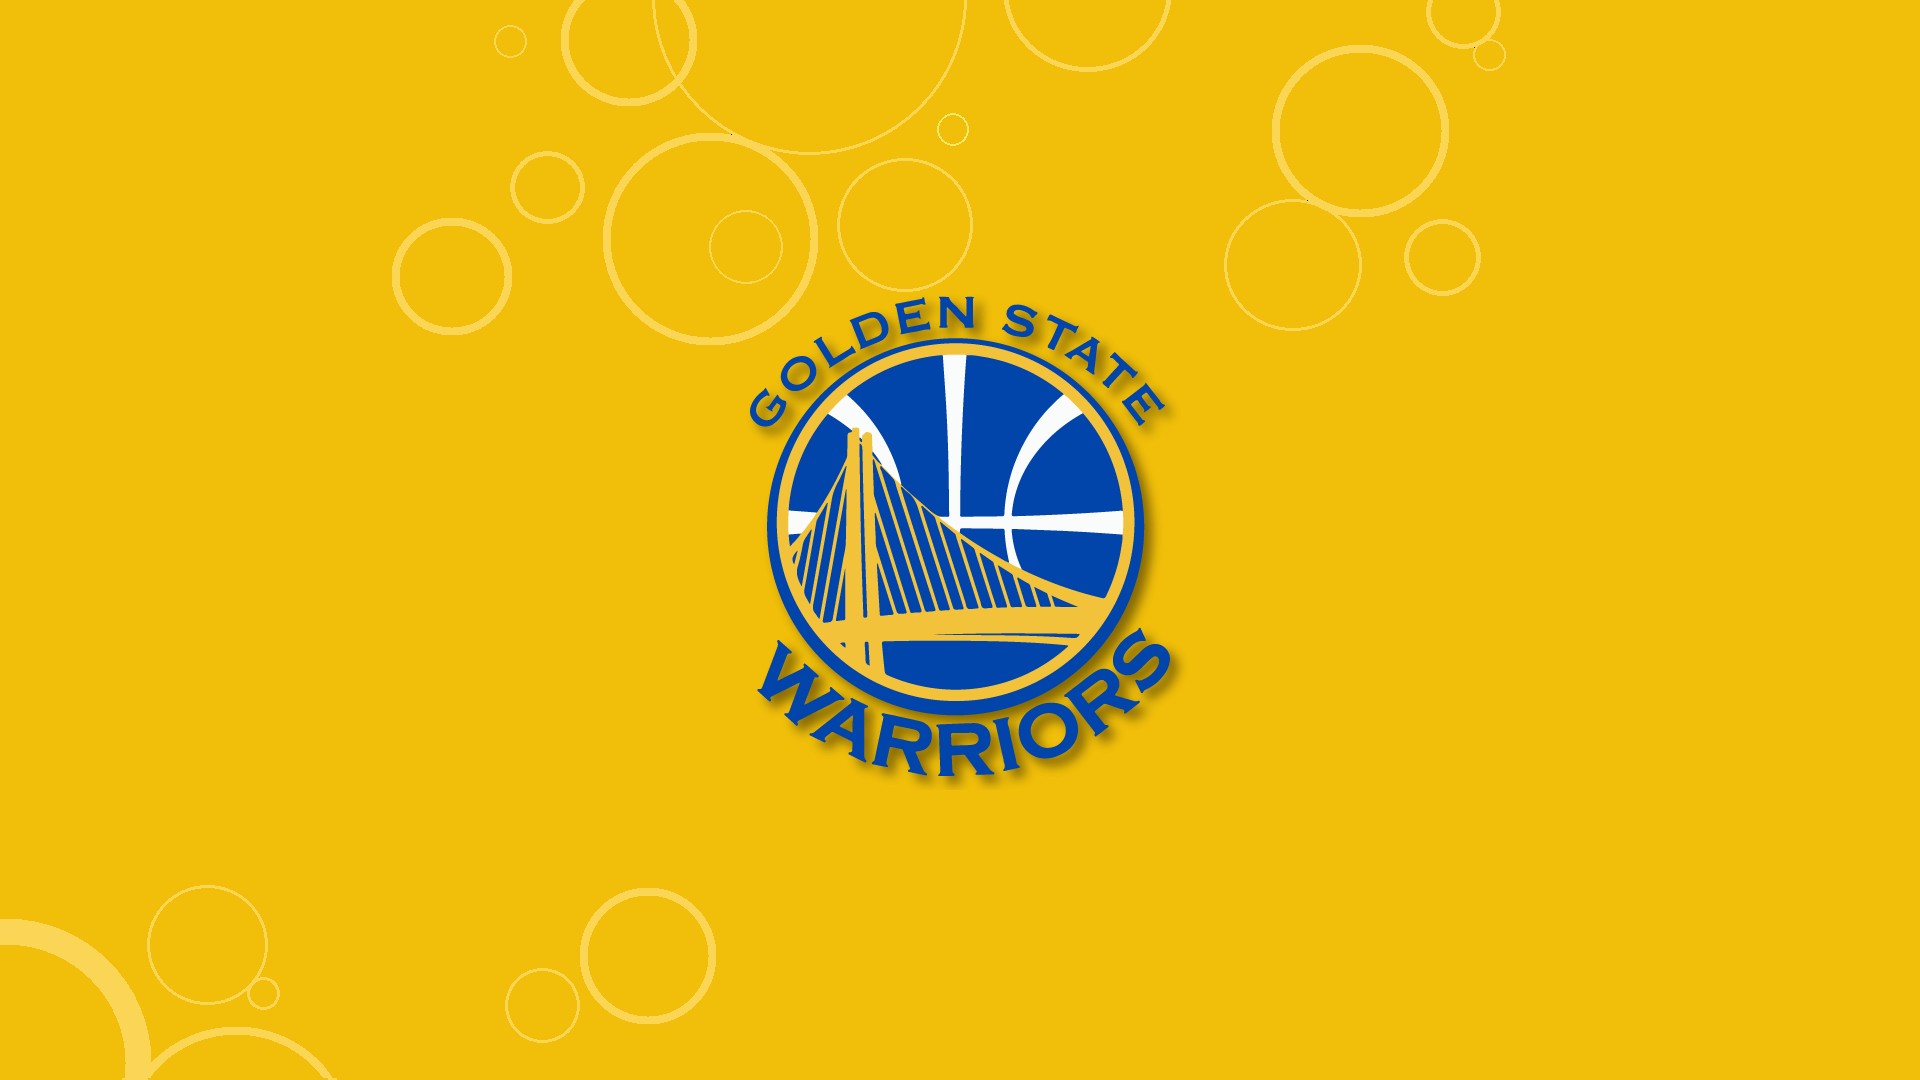 Golden State Warriors NBA For Desktop Wallpaper with image dimensions 1920x1080 pixel. You can make this wallpaper for your Desktop Computer Backgrounds, Windows or Mac Screensavers, iPhone Lock screen, Tablet or Android and another Mobile Phone device